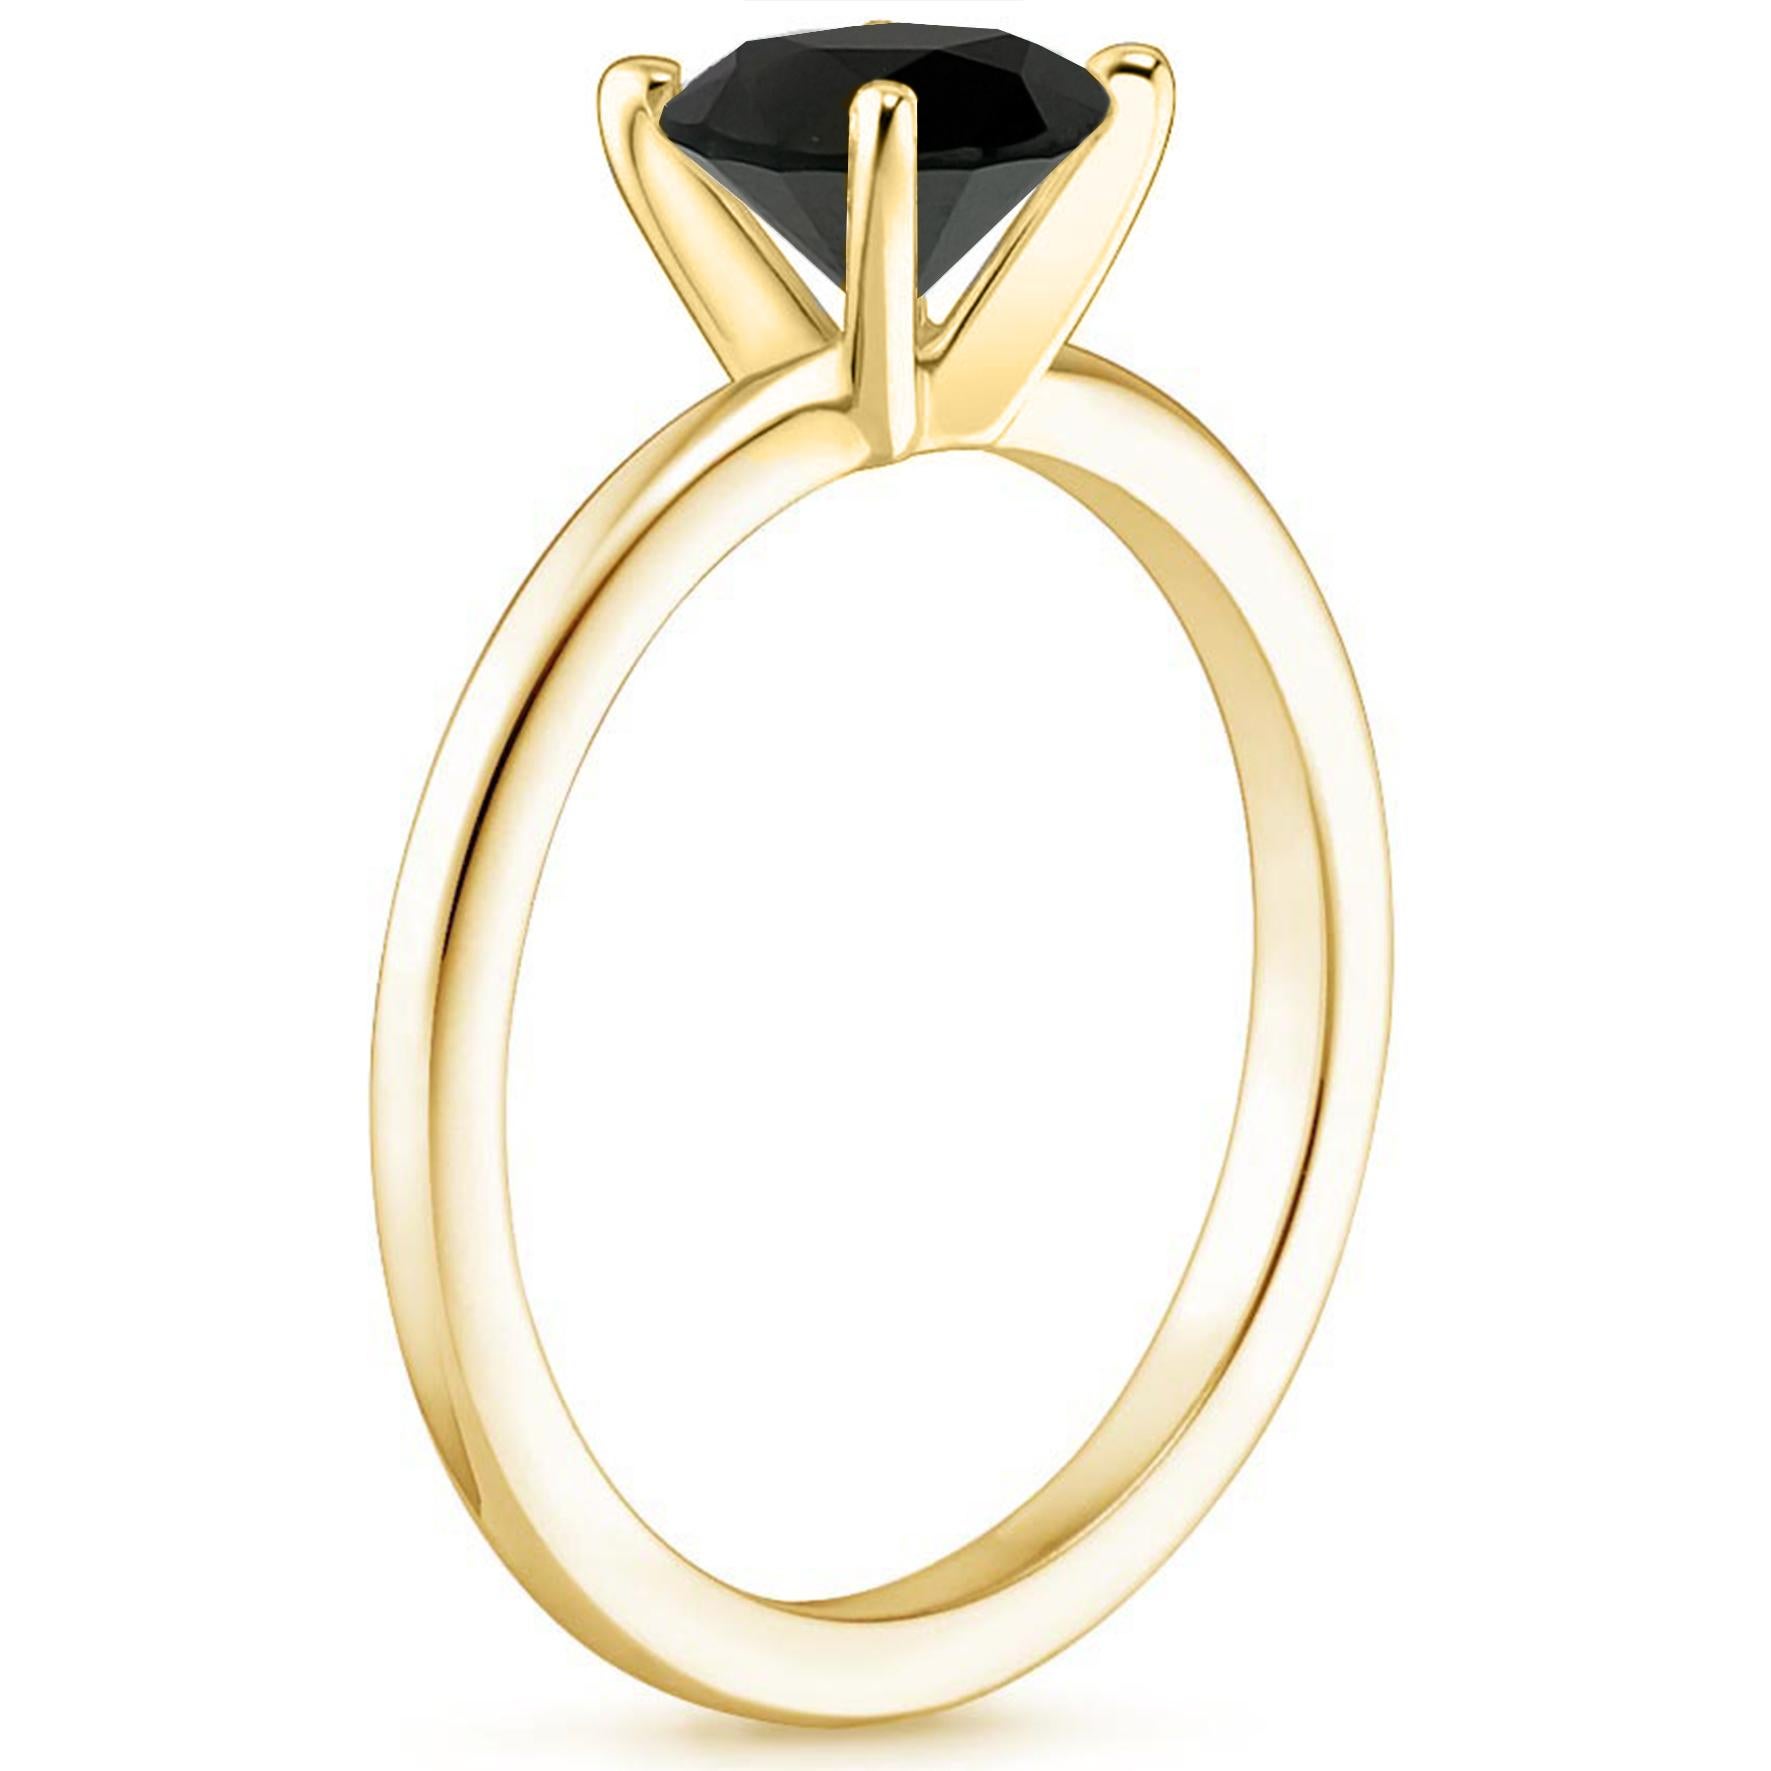 Finely crafted and custom made in brightly polished 14K Yellow Gold, this spectacular engagement ring features a fine black diamond which  and weighs 3.22 carats. This center stone measures 8.50 x 8.61 x 6.40 mm and is set atop a smooth band. The